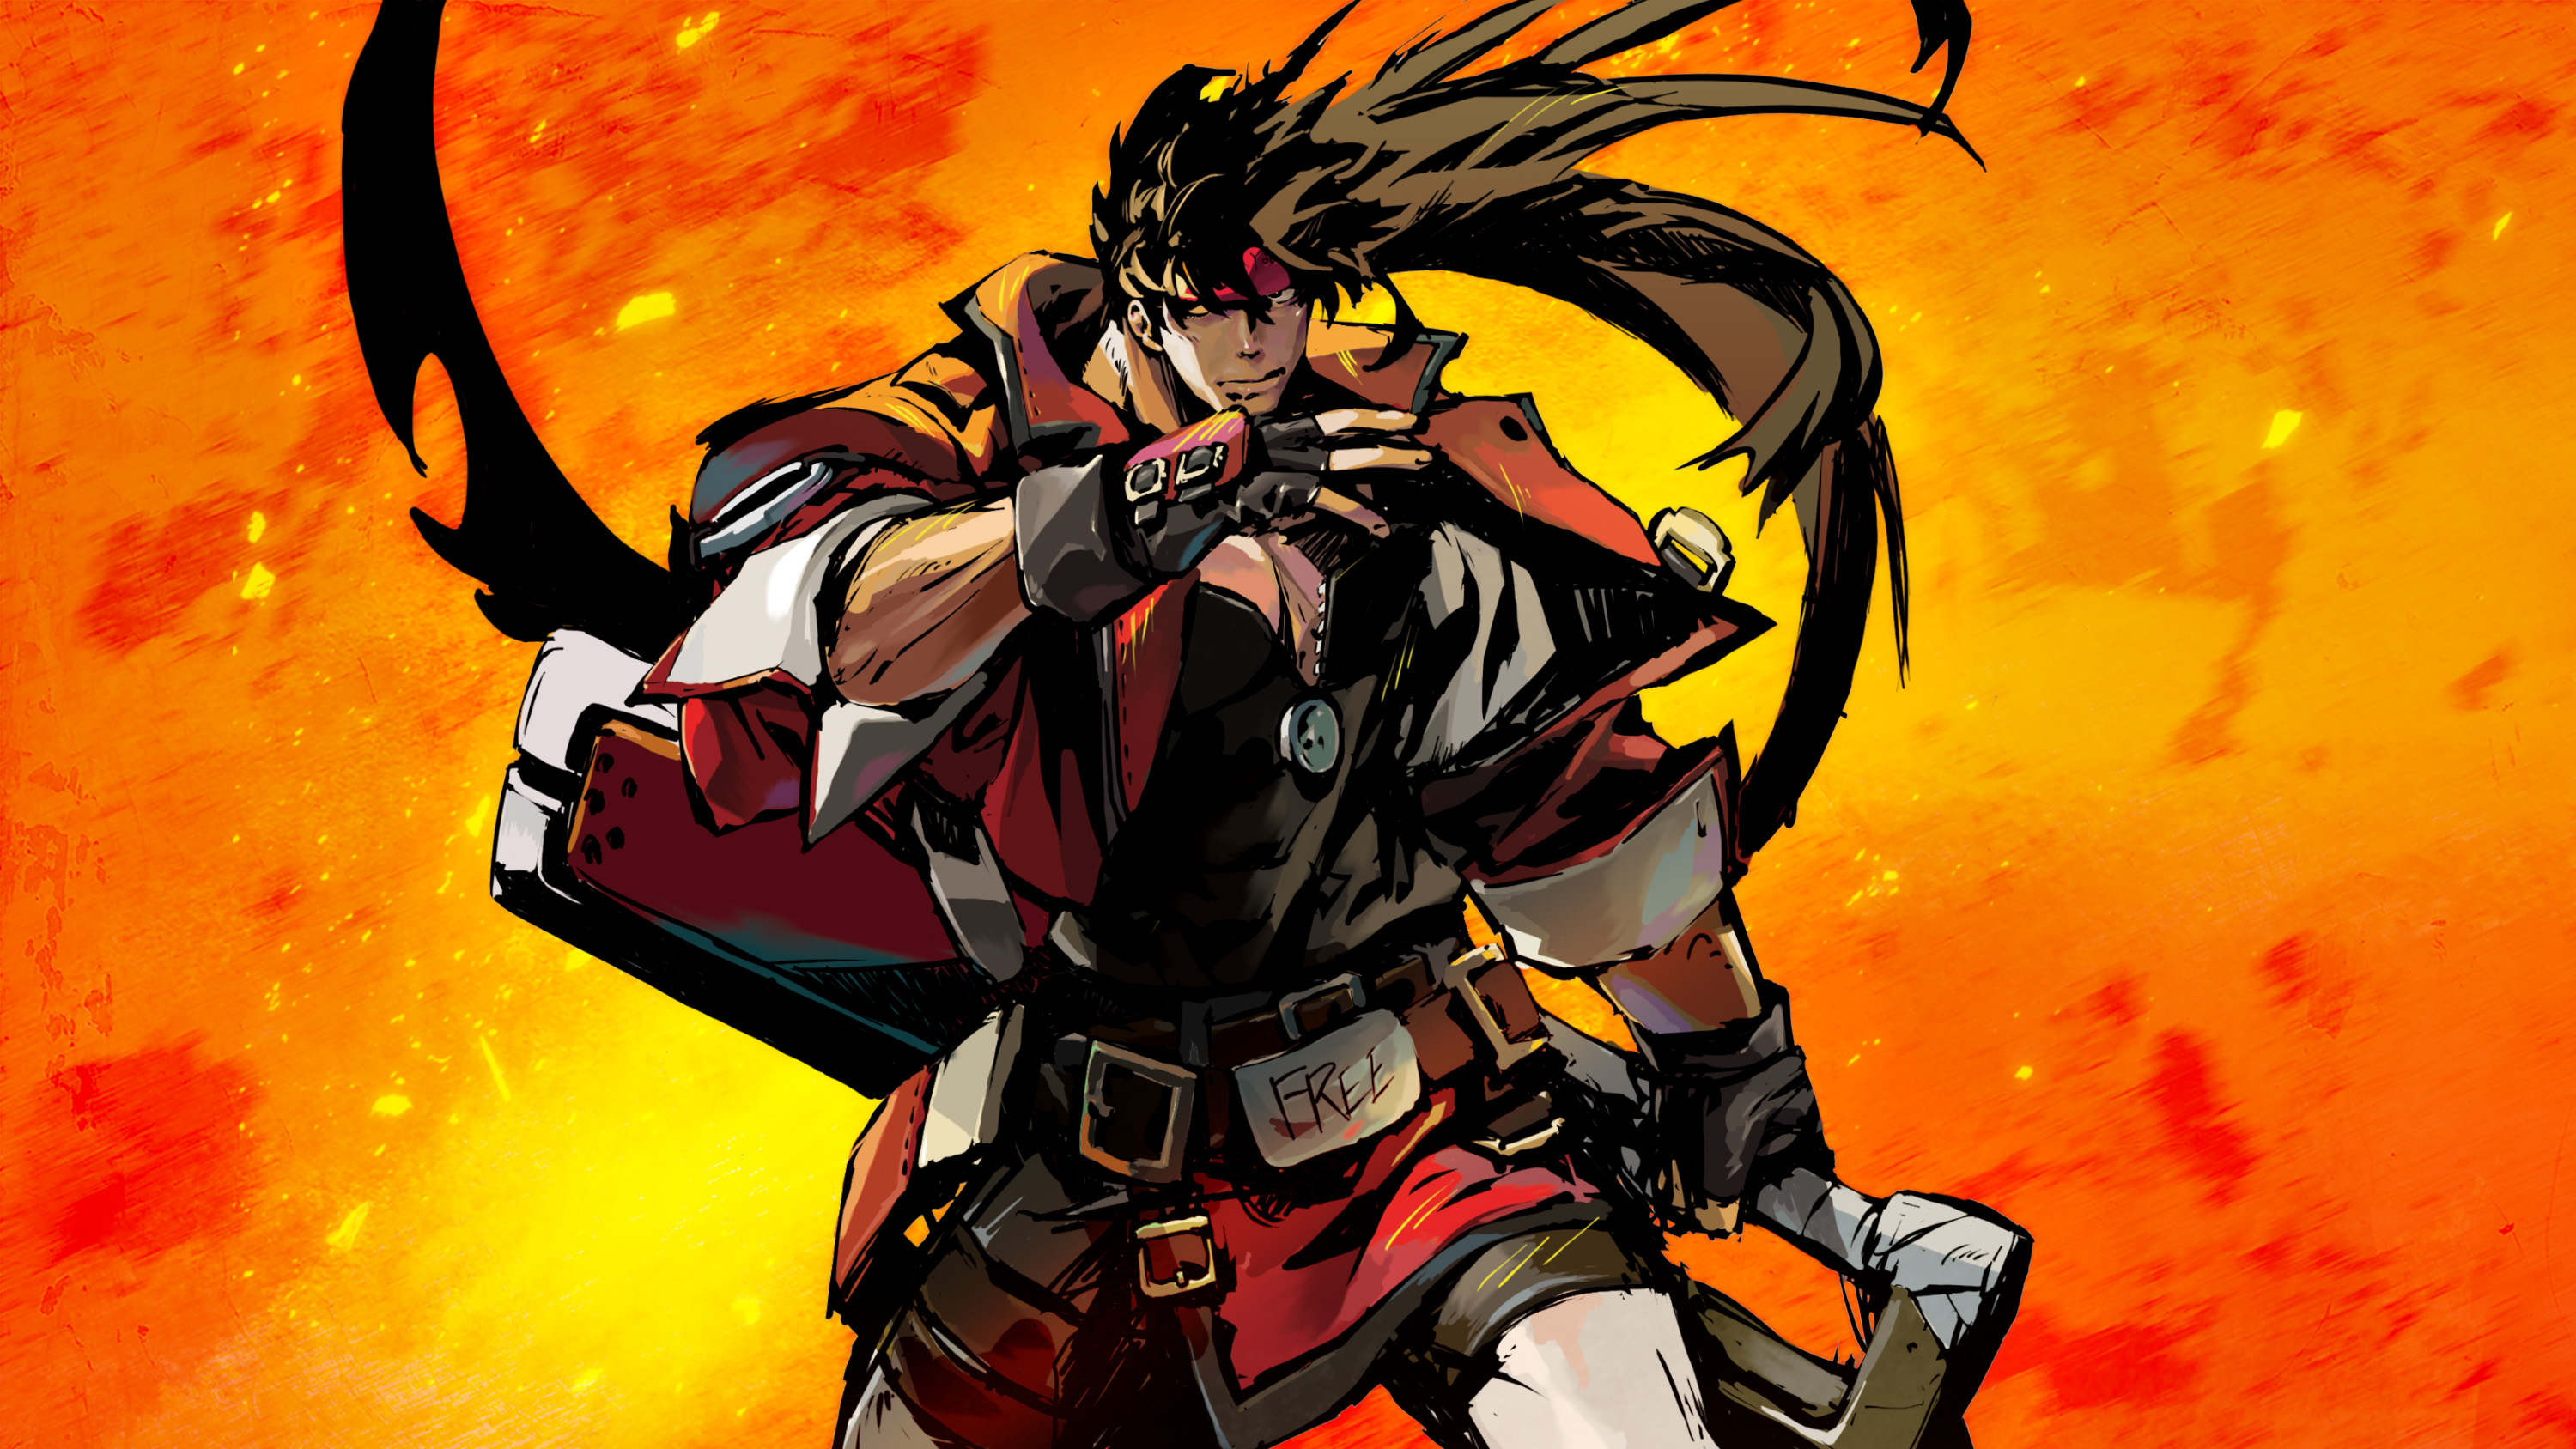 Sol Badguy wipes blood from his chin in key art for Guilty Gear Strive: The Board Game